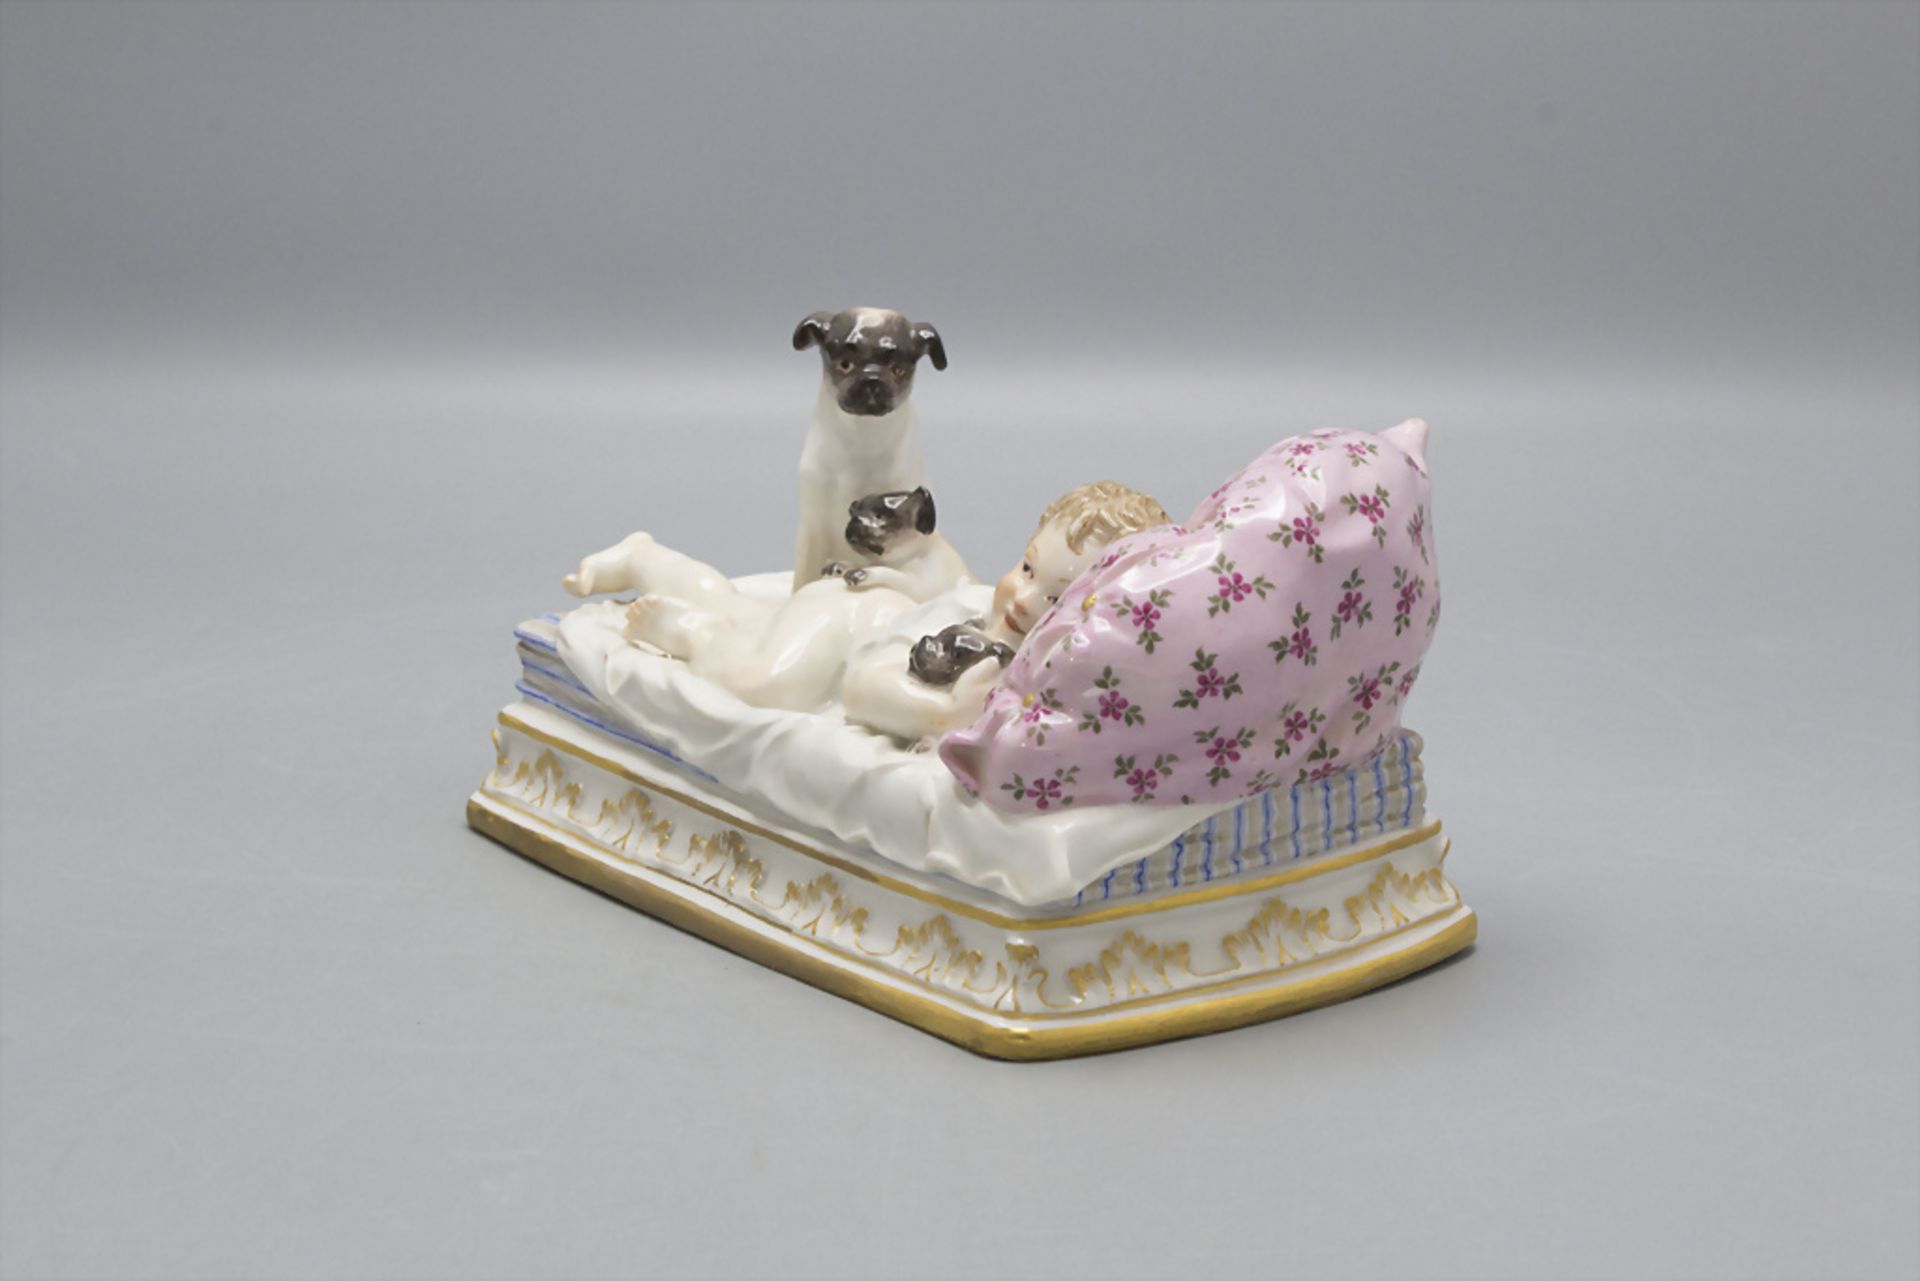 Kind mit 3 Mopshunden / A child with 3 pug dogs, Meissen, Ende 19. Jh. - Image 2 of 5